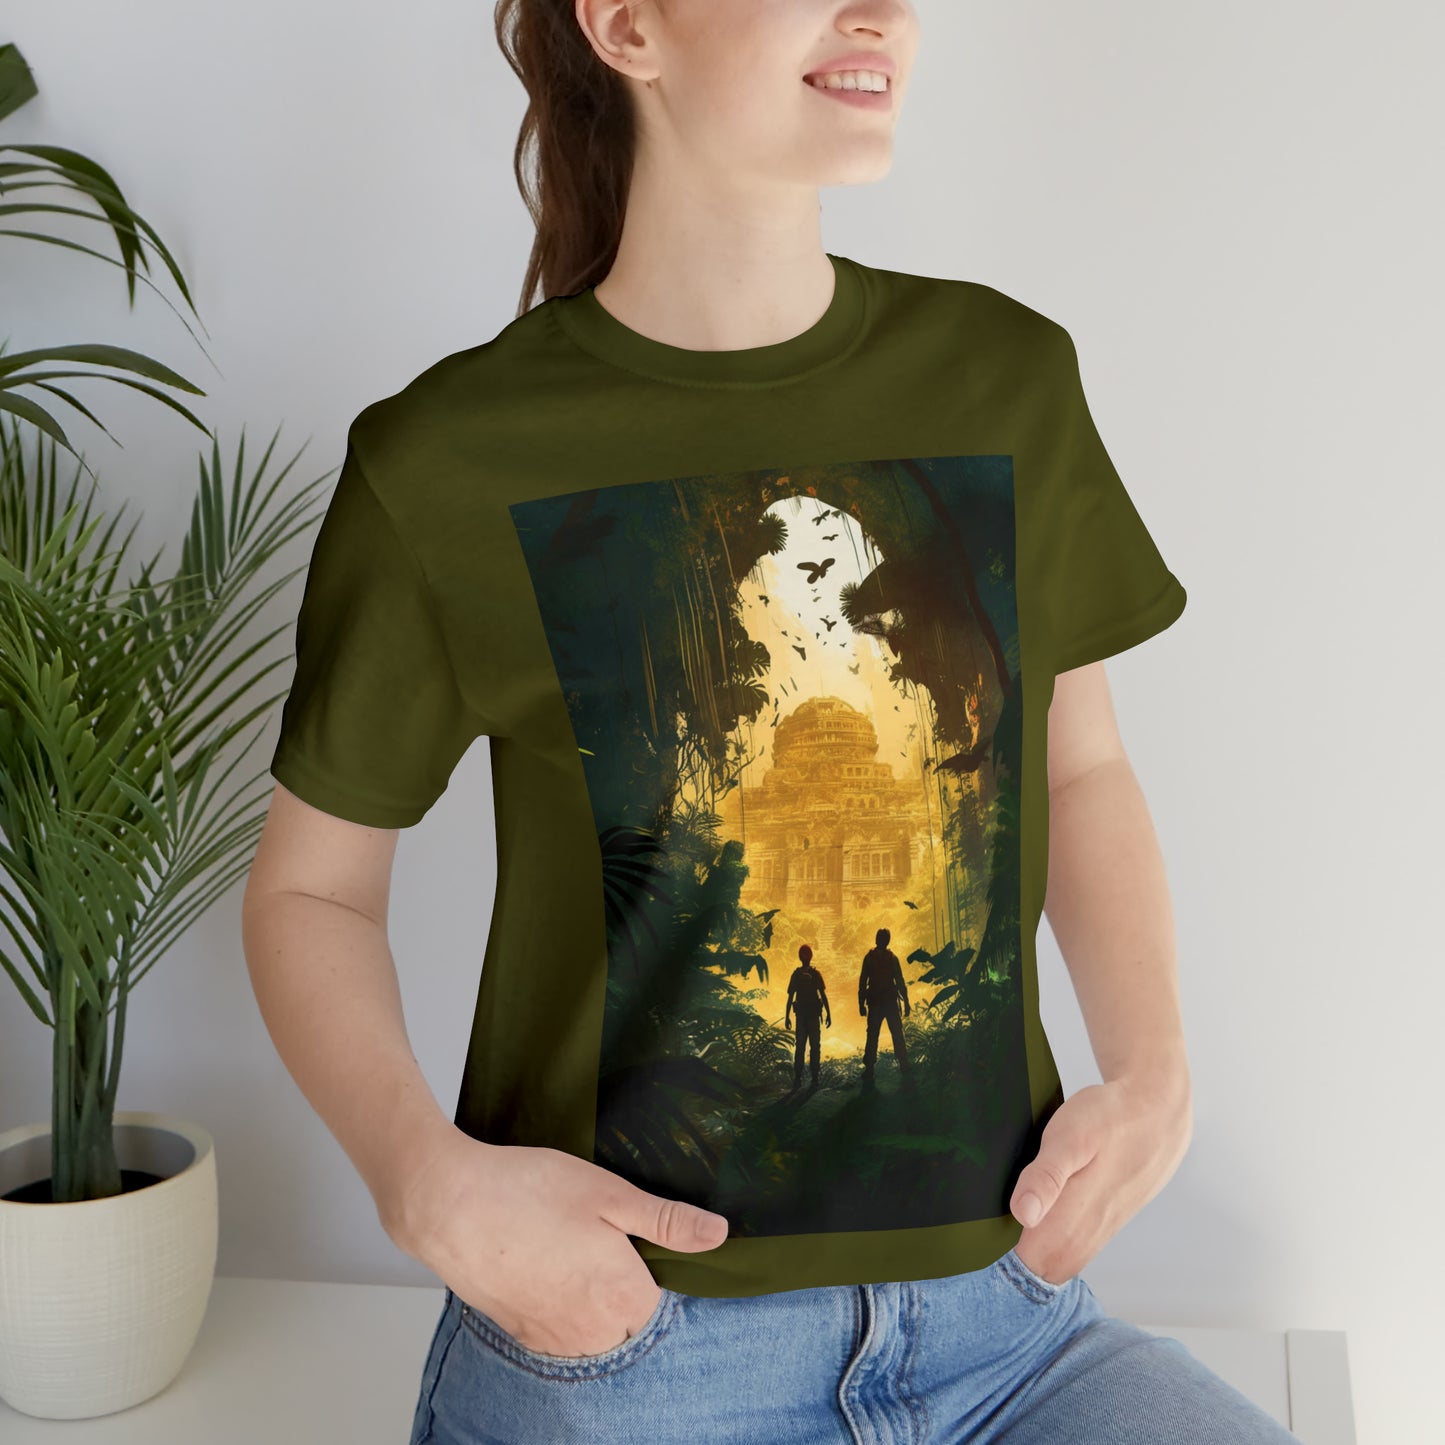 olive-quest-thread-tee-shirt-with-ruins-of-arnak-scene-on-front